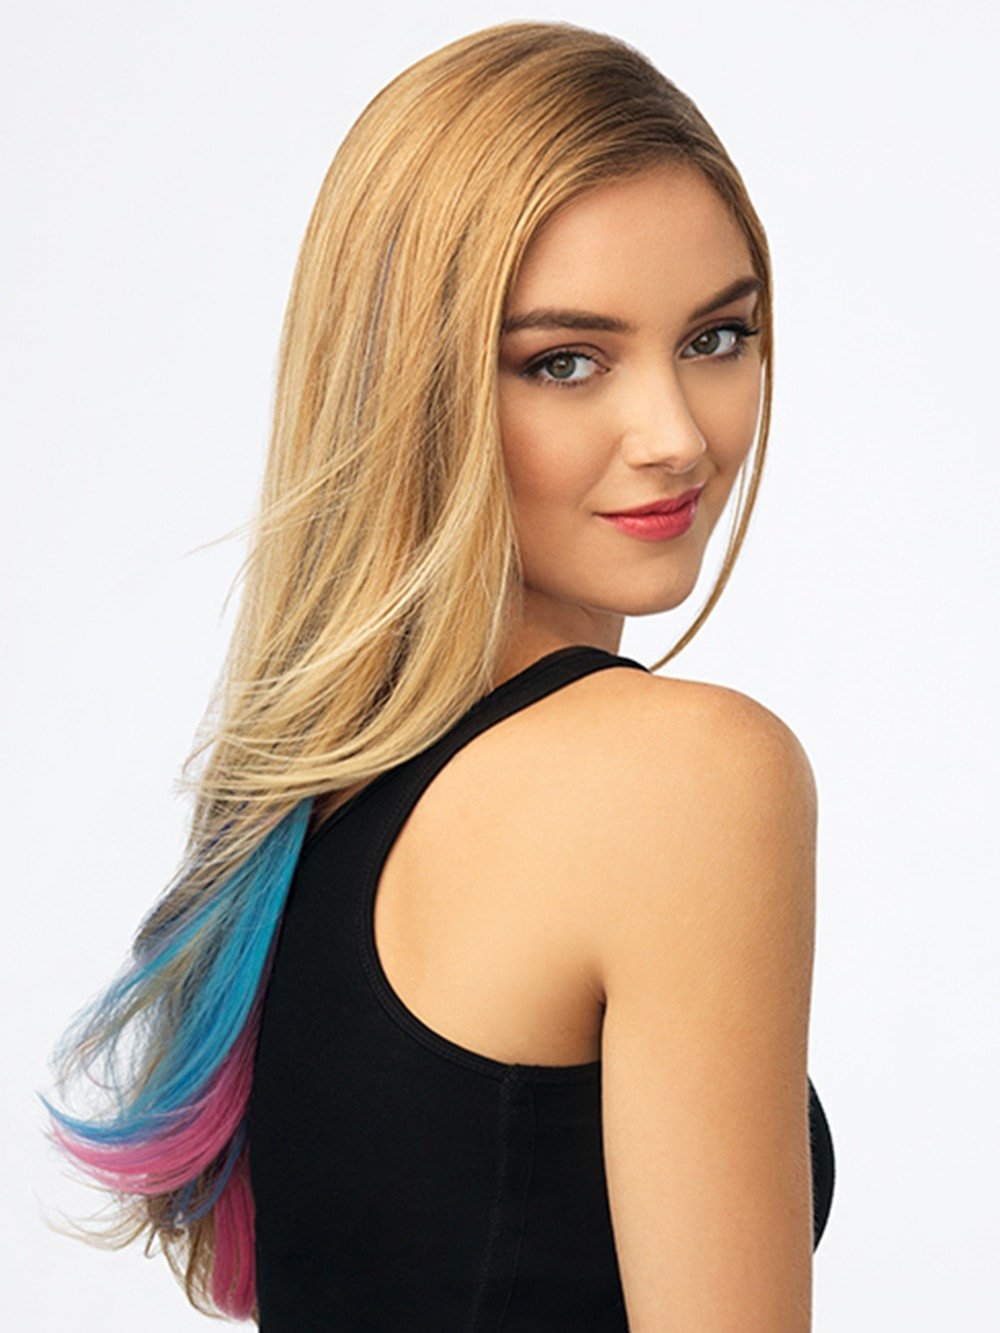 What’s your favorite color? Stick to one or mix and match to brighten up your do